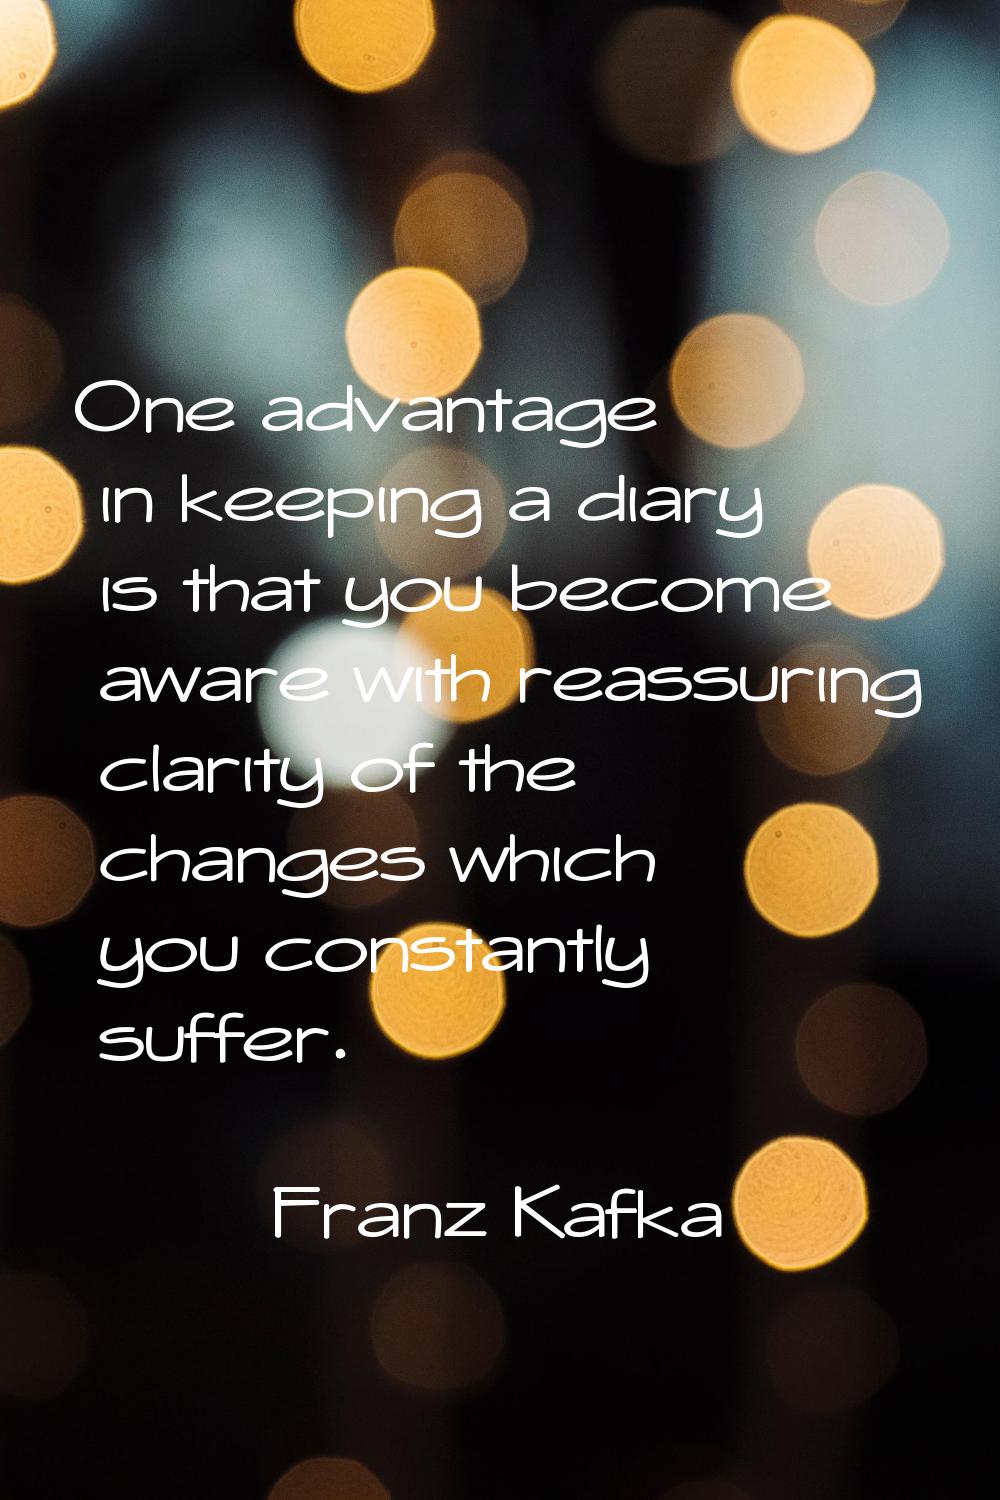 One advantage in keeping a diary is that you become aware with reassuring clarity of the changes wh